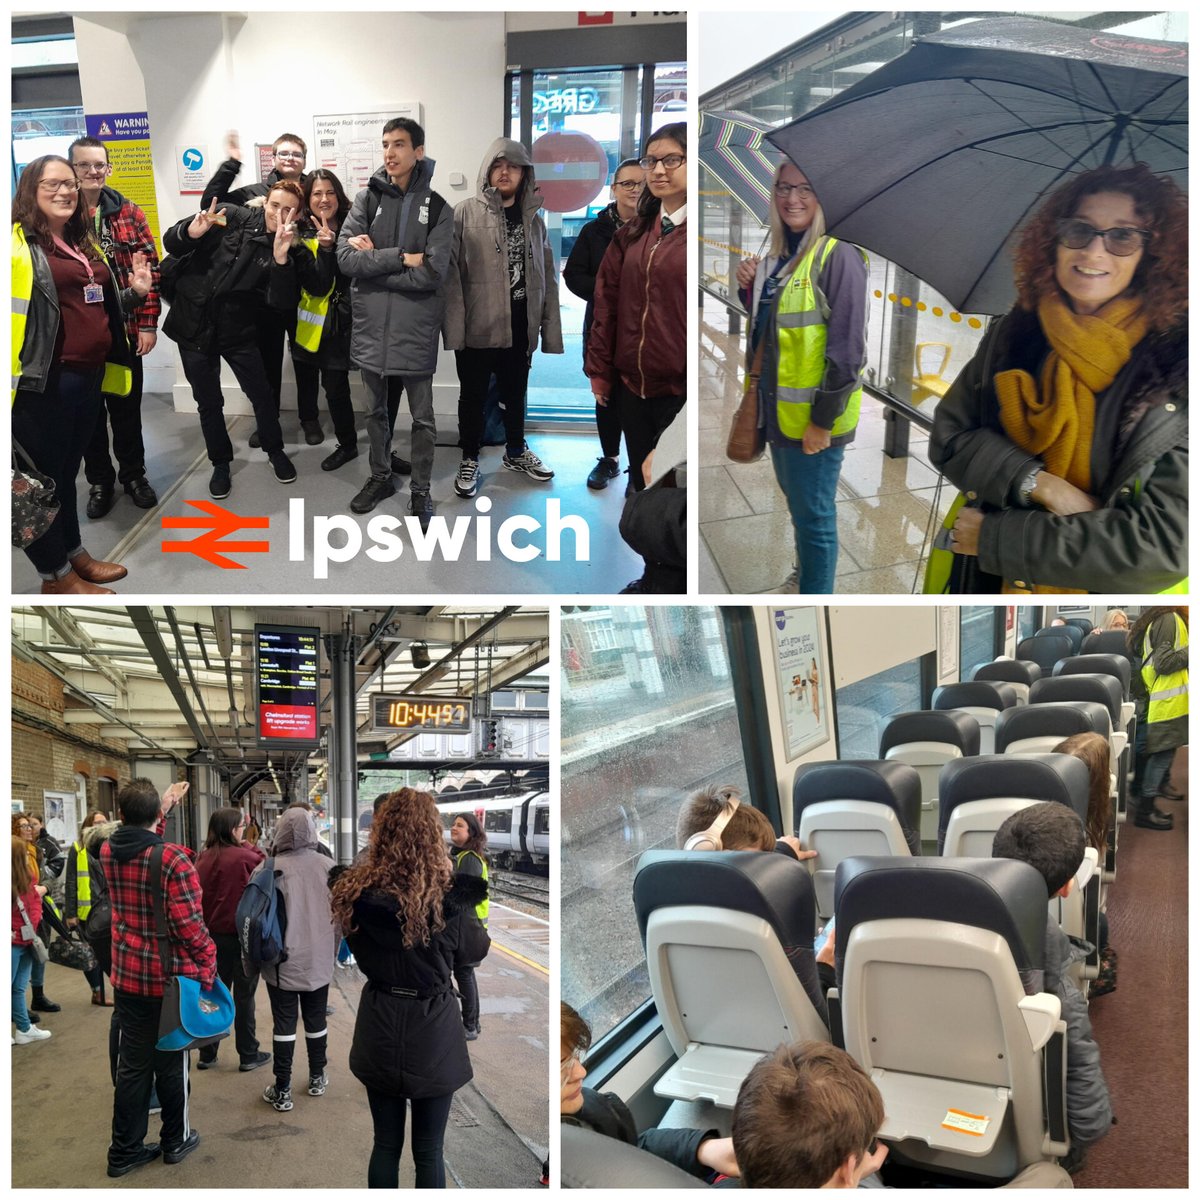 Today we teamed up w/the Travel Training folks @Essex_CC @suffolkcc on a journey from Ipswich to Felixstowe w/16-18 yr olds. Travel training gives people w/ special educational needs or disabilities the confidence & skills to travel independently on trains, buses, walking routes.